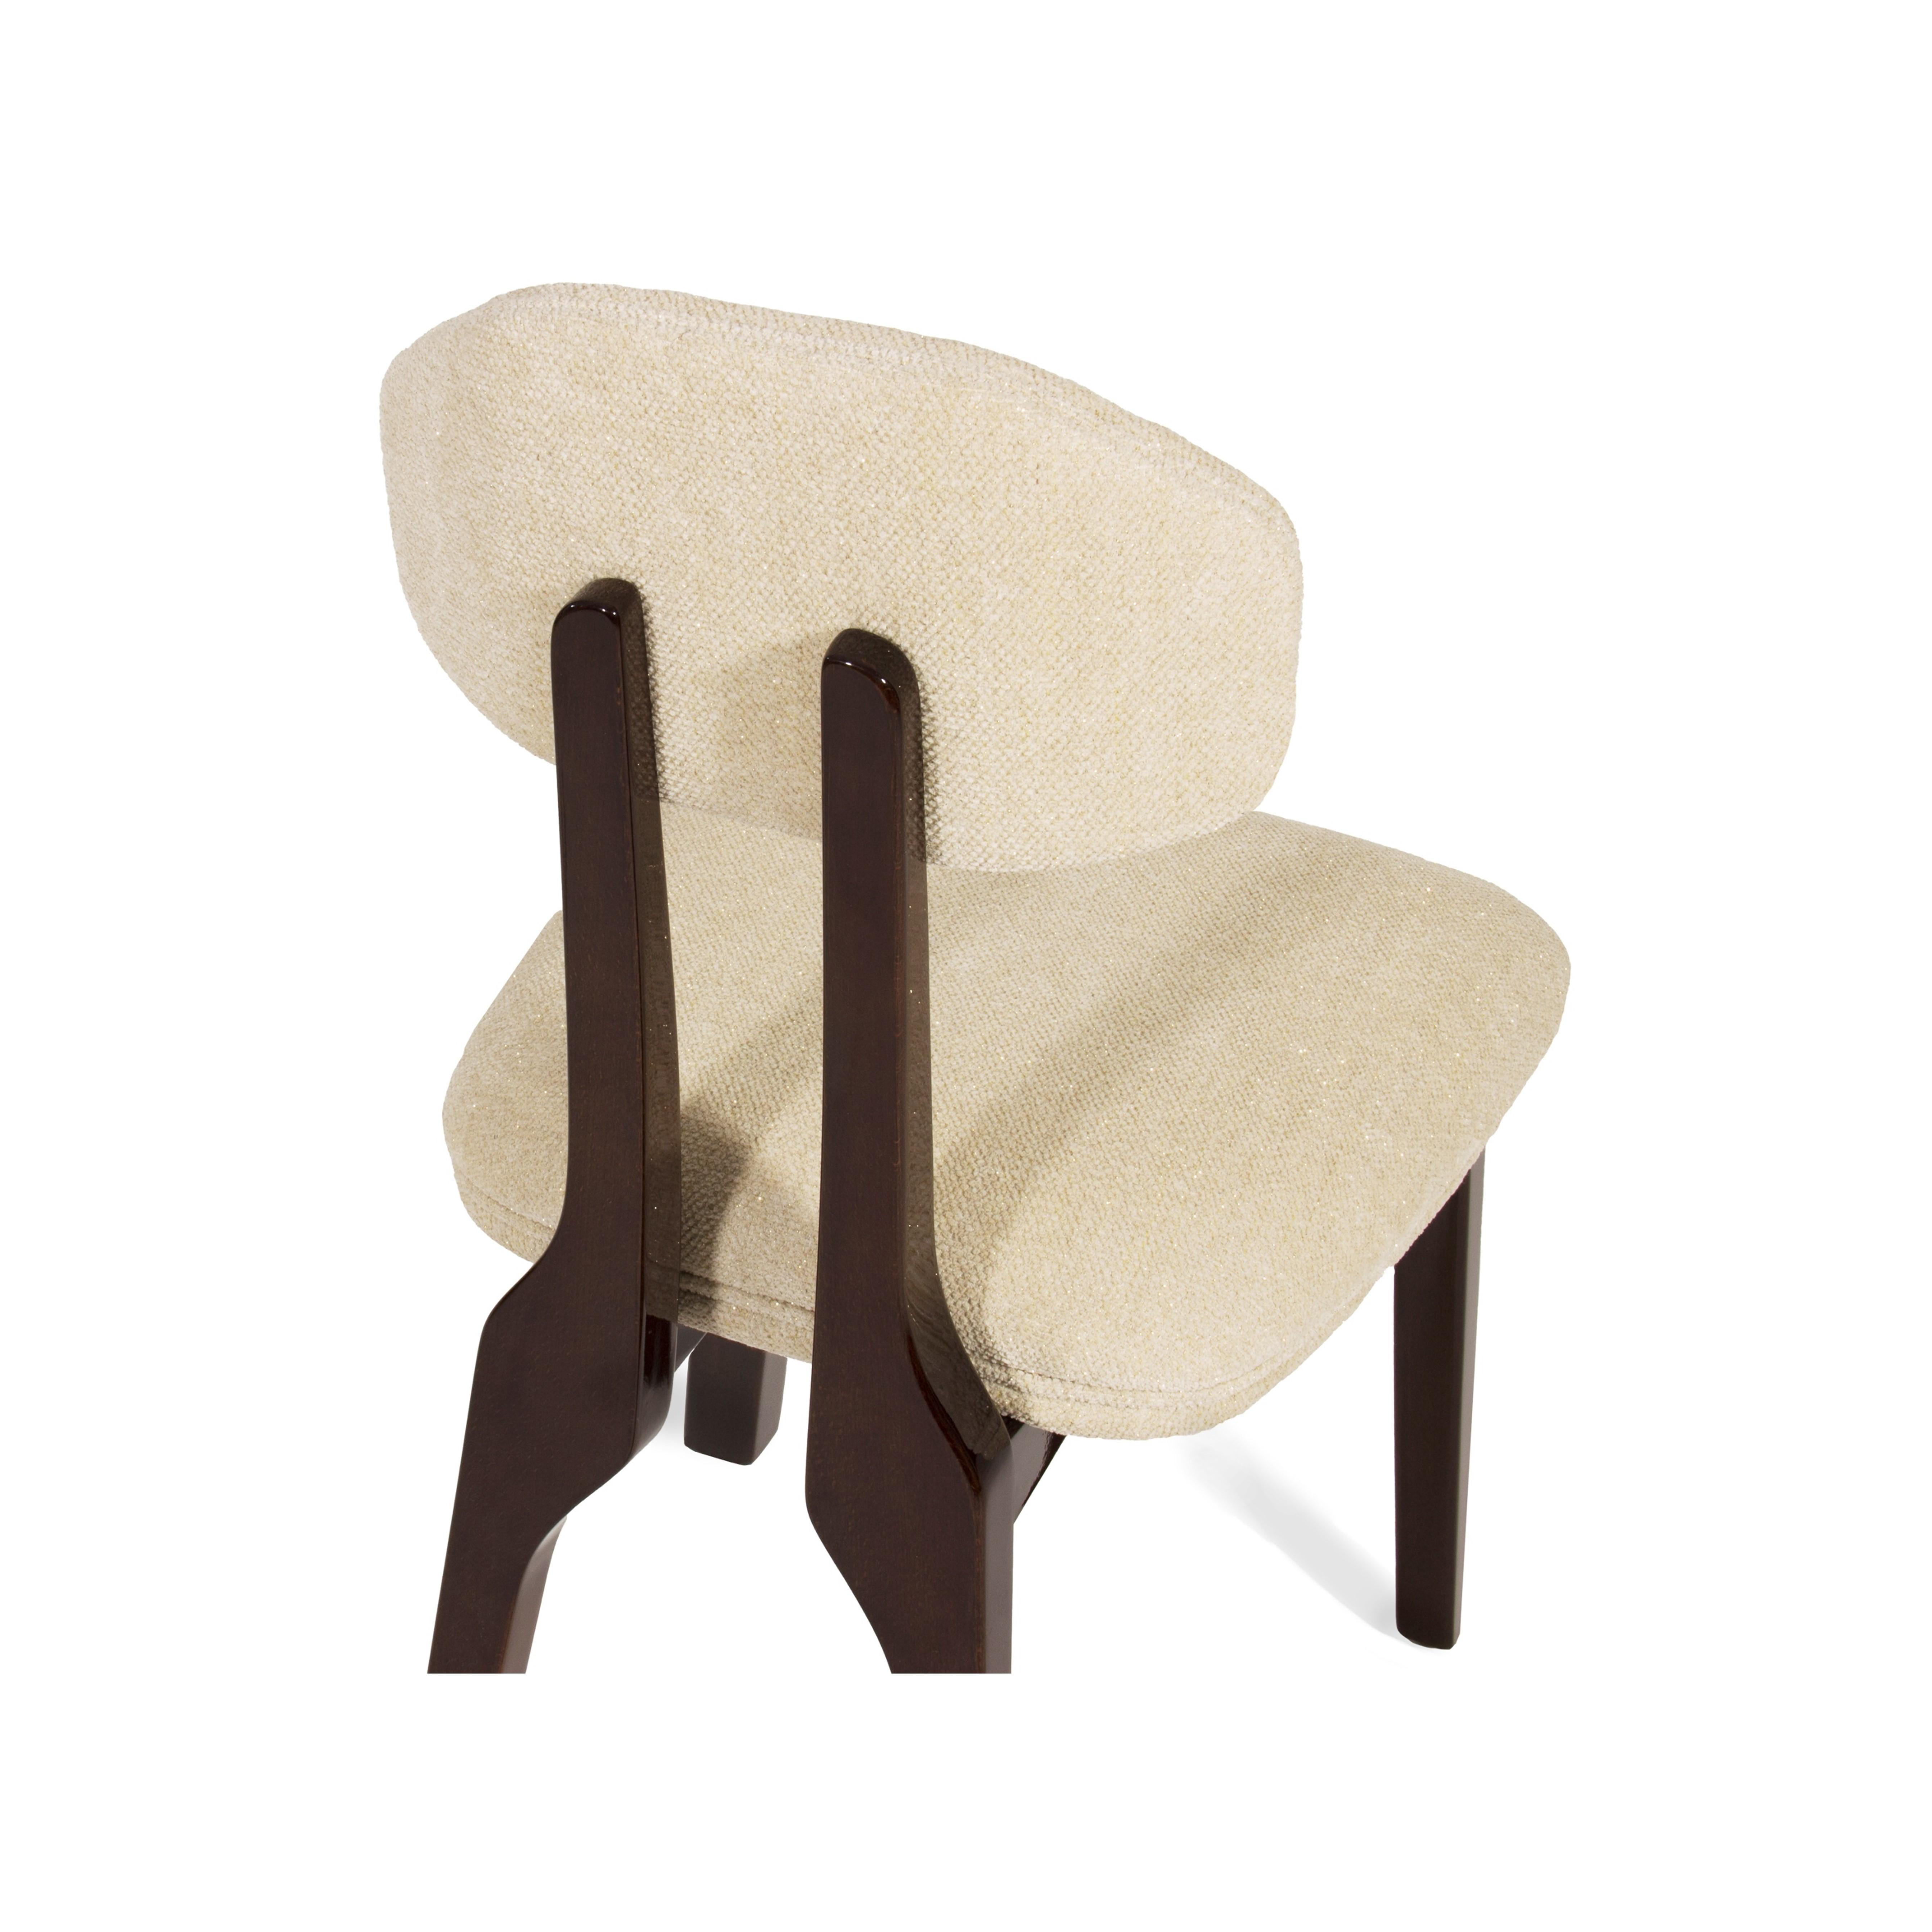 Silhouette Dining Chair, Translucent Brown, InsidherLand by Joana Santos Barbosa In New Condition For Sale In Maia, Porto